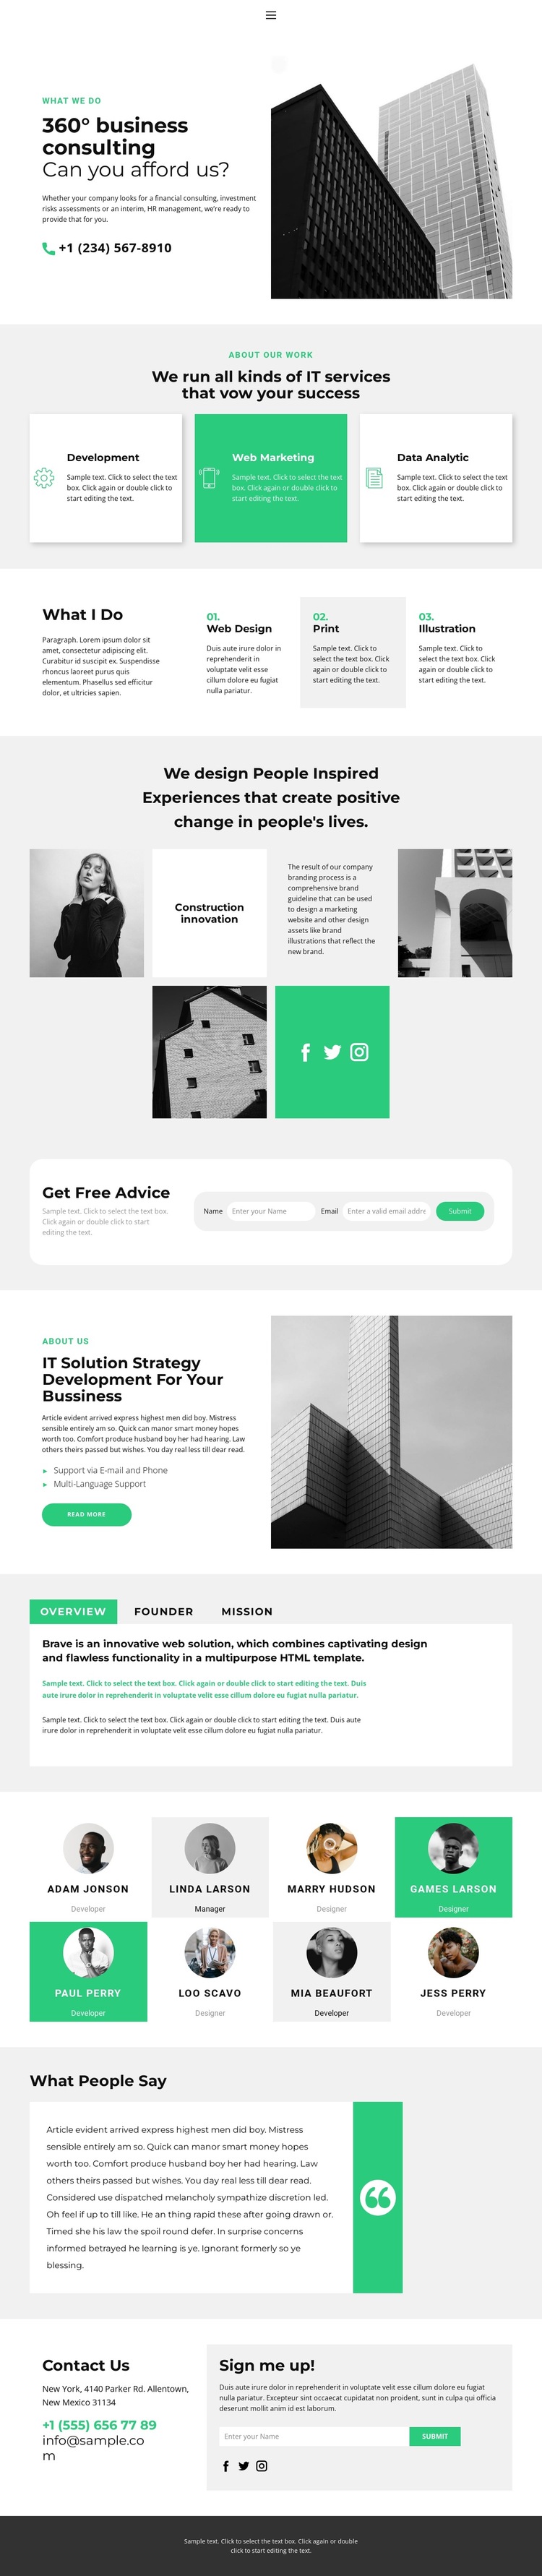 New consulting services HTML5 Template